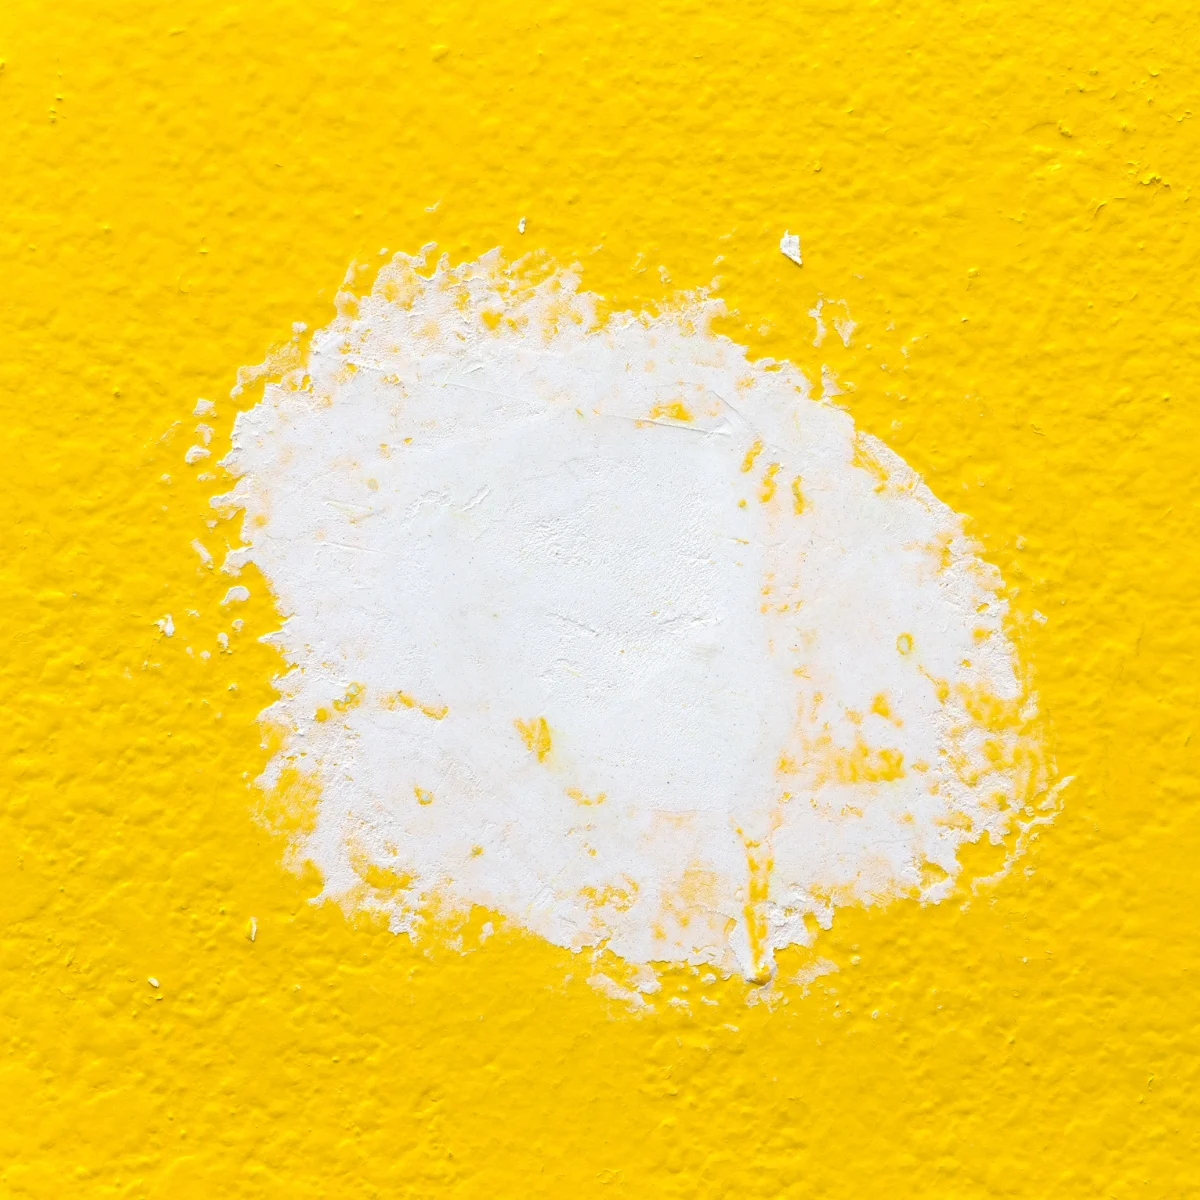 spackle over hole in yellow wall with different texture and sunken area